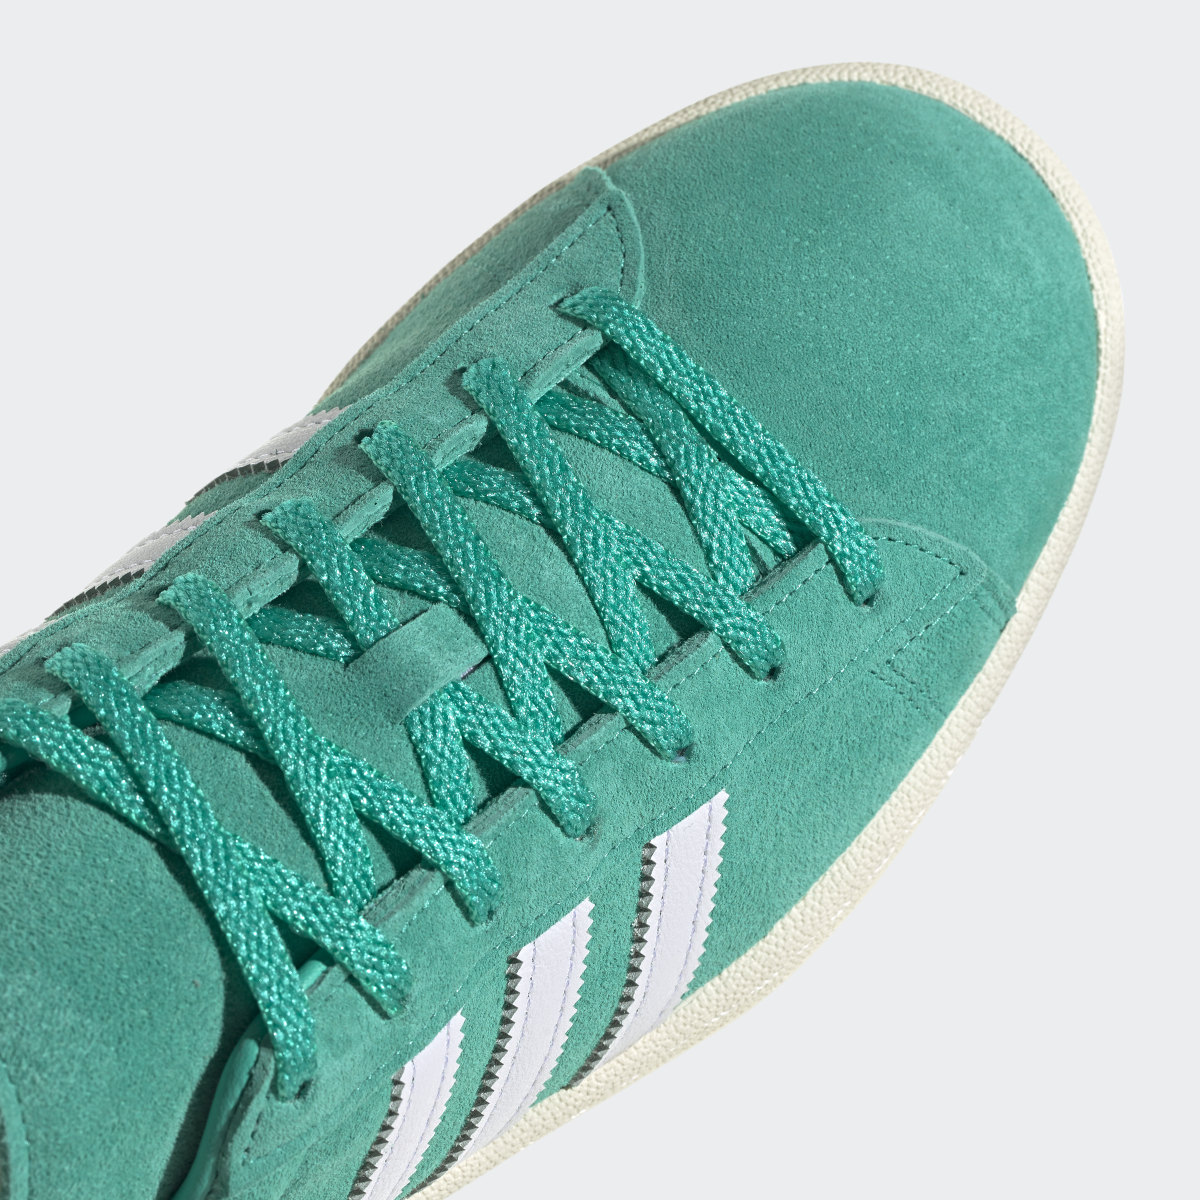 Adidas Campus 80s Shoes. 10